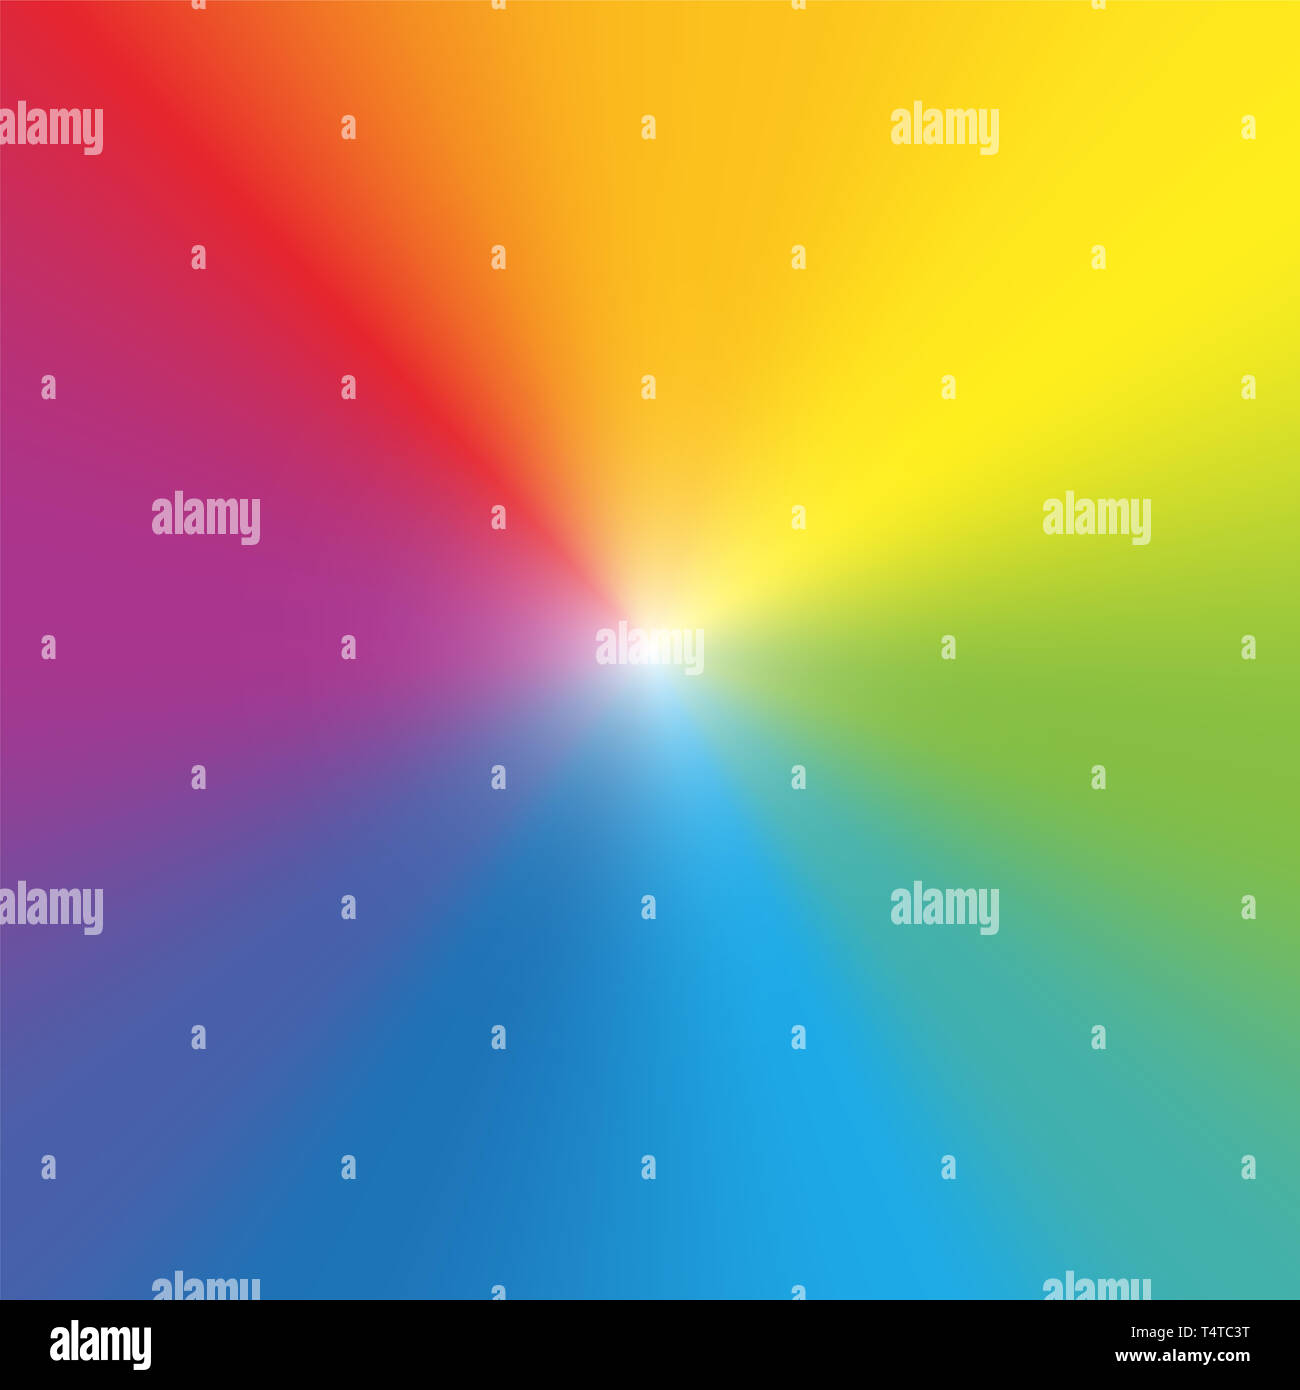 Rainbow color background wallpaper. Gradient spectral colored rays with light center. Stock Photo